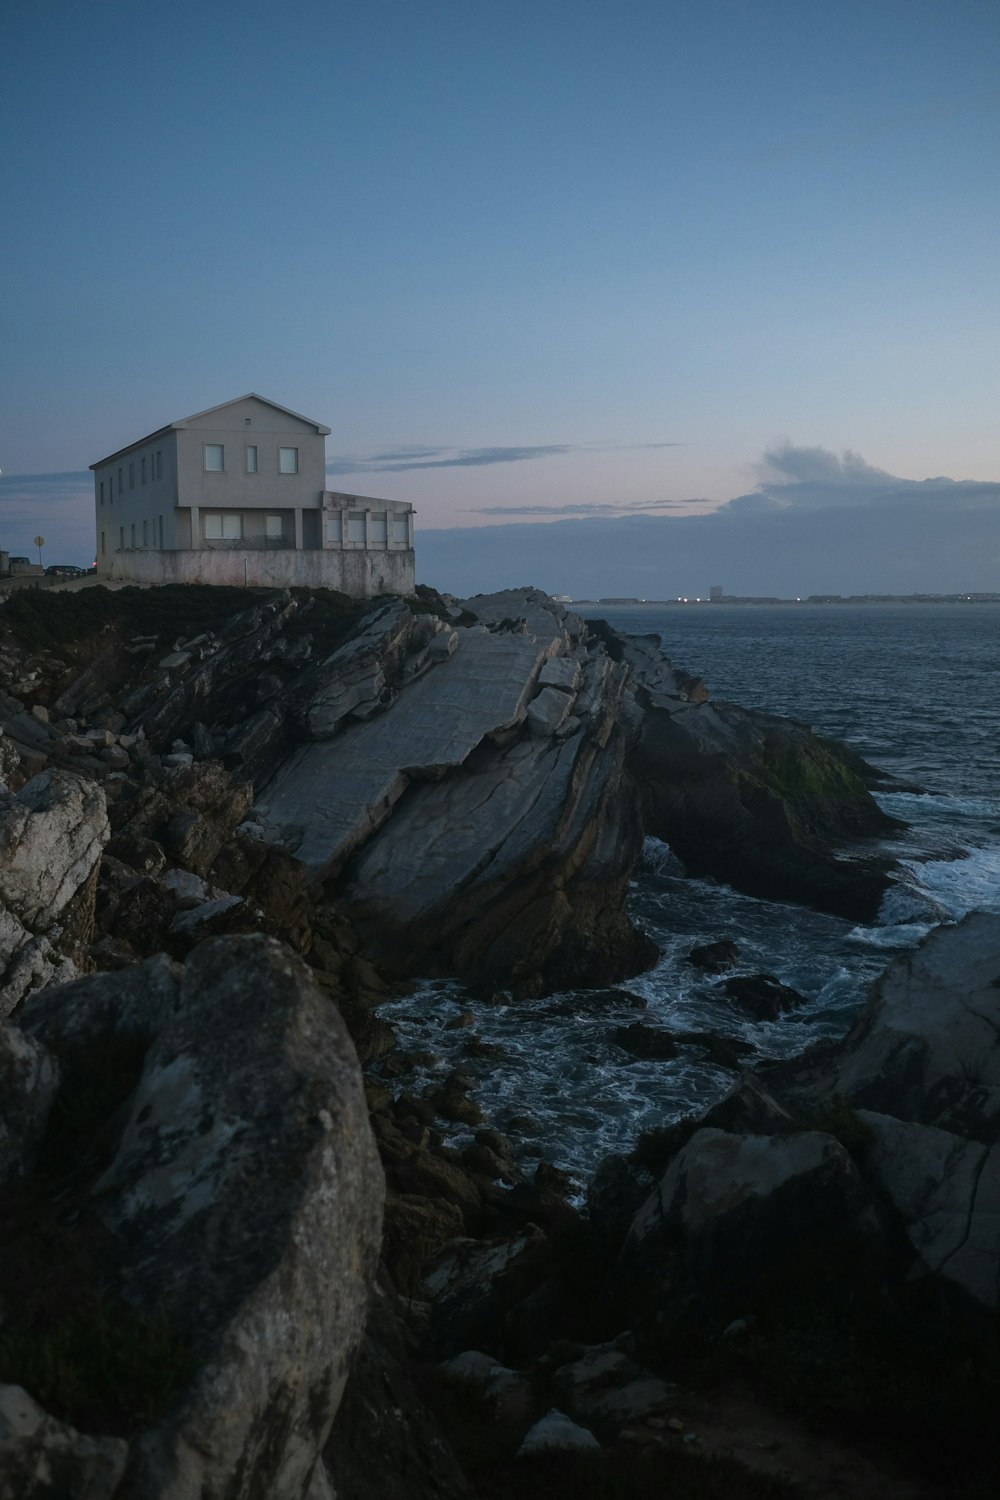 a house sitting on top of a rocky cliff next to the ocean